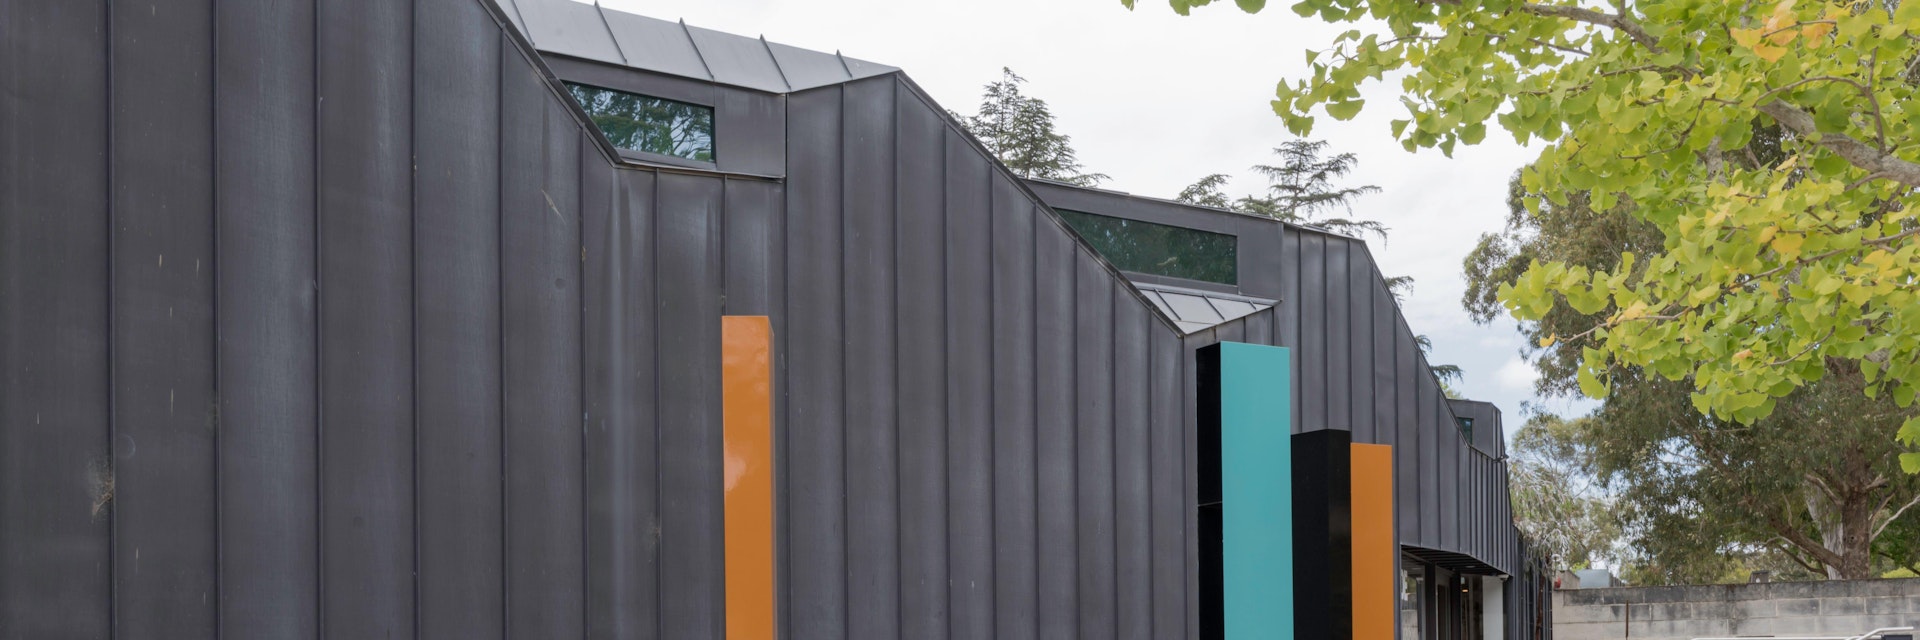 2AW6EA0 Heide III, is a purpose built museum space with a black titanium zinc facade, one of four main buildings on the site of the Heide Museum of Modern Art